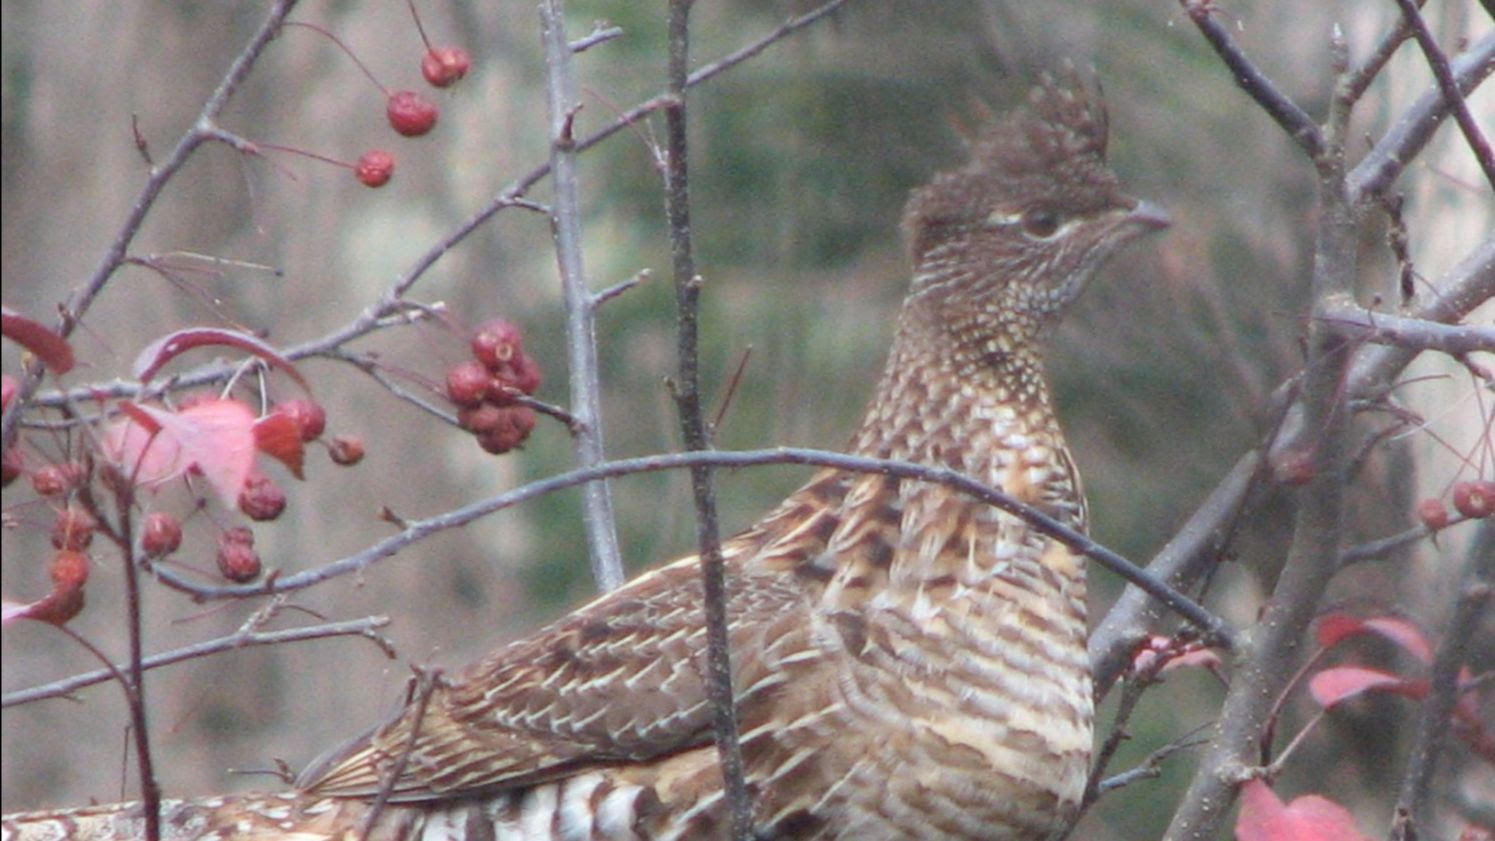 A Ruffed Grouse in the bare branches of a decorative crabapple.